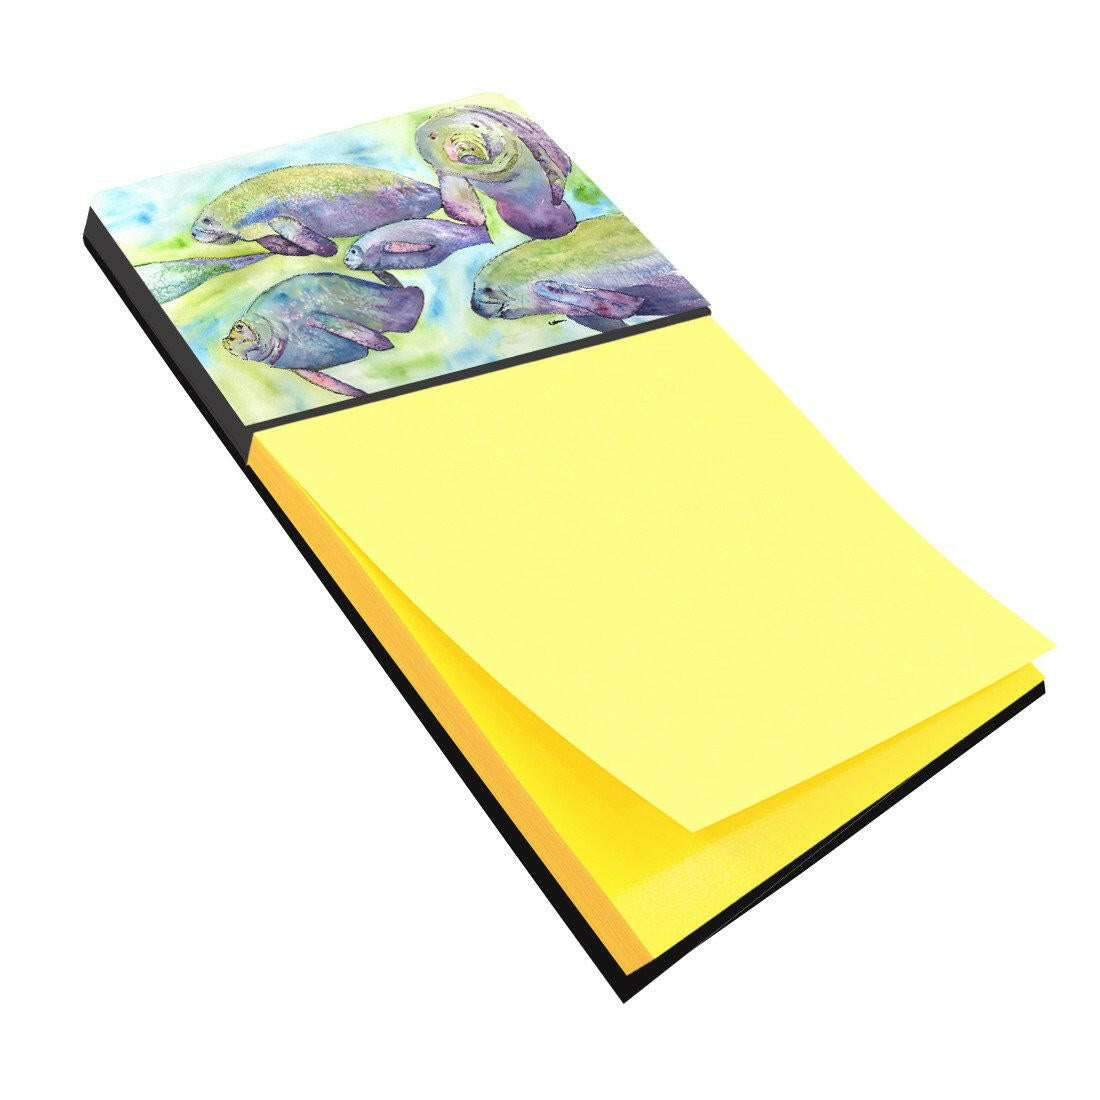 Manatee Refiillable Sticky Note Holder or Postit Note Dispenser 8544SN by Caroline's Treasures